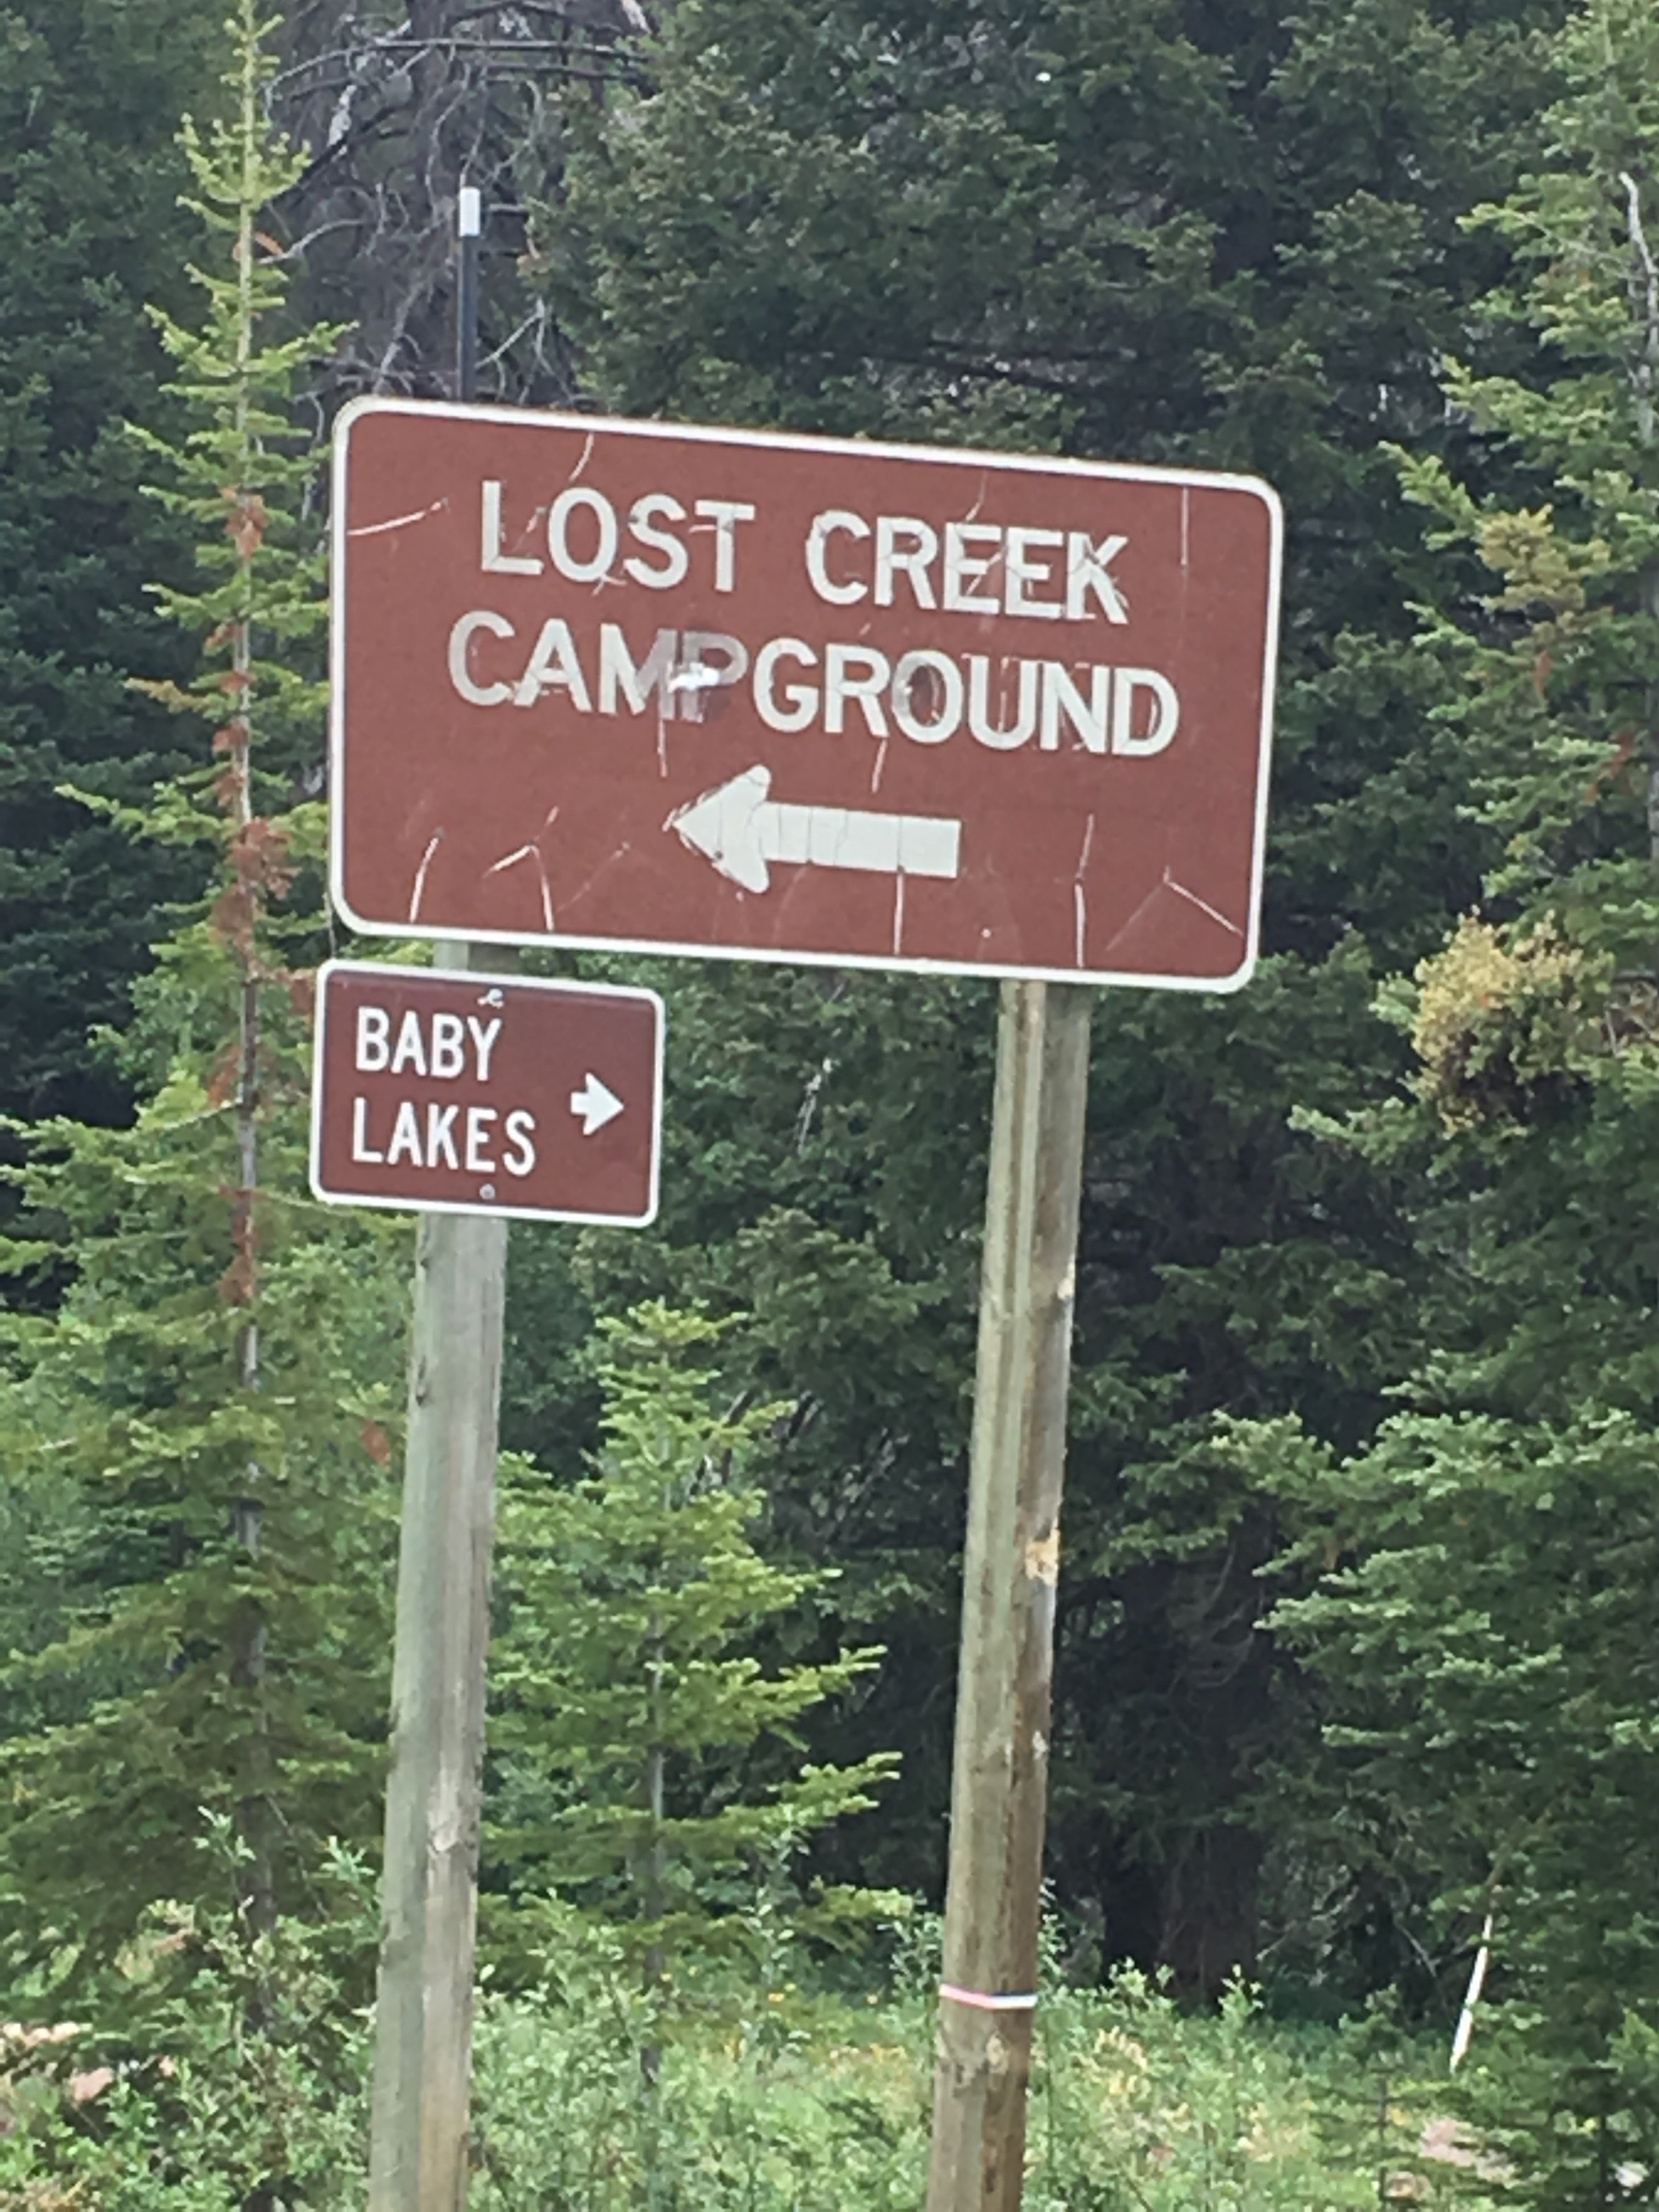 Camper submitted image from Lost Creek - 1